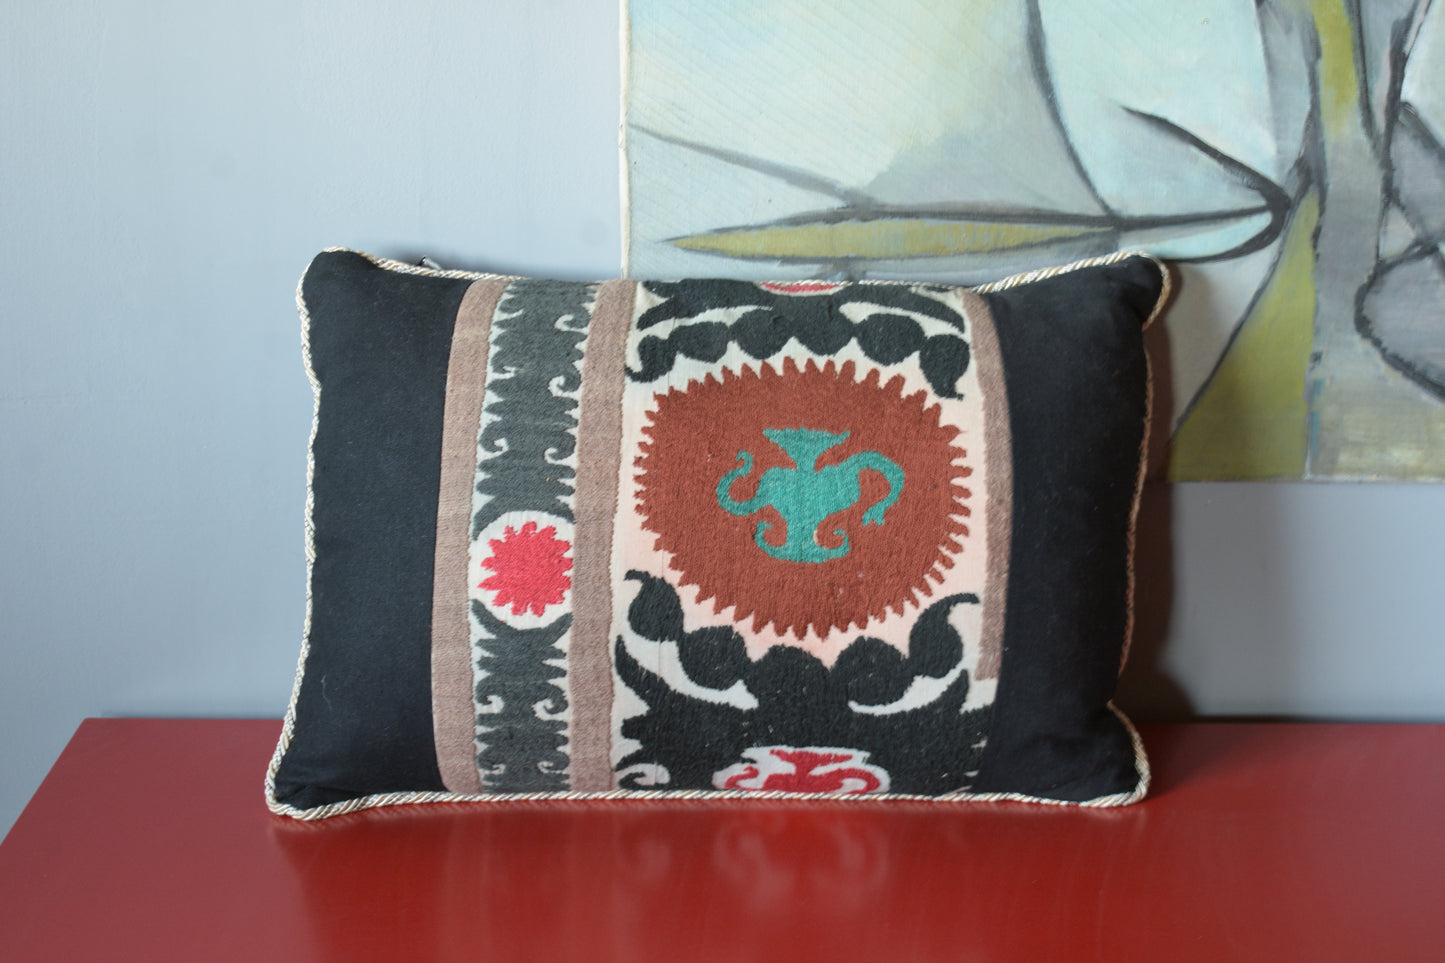 Antique Embroidered Nim Suzani Pillows with Black Linen